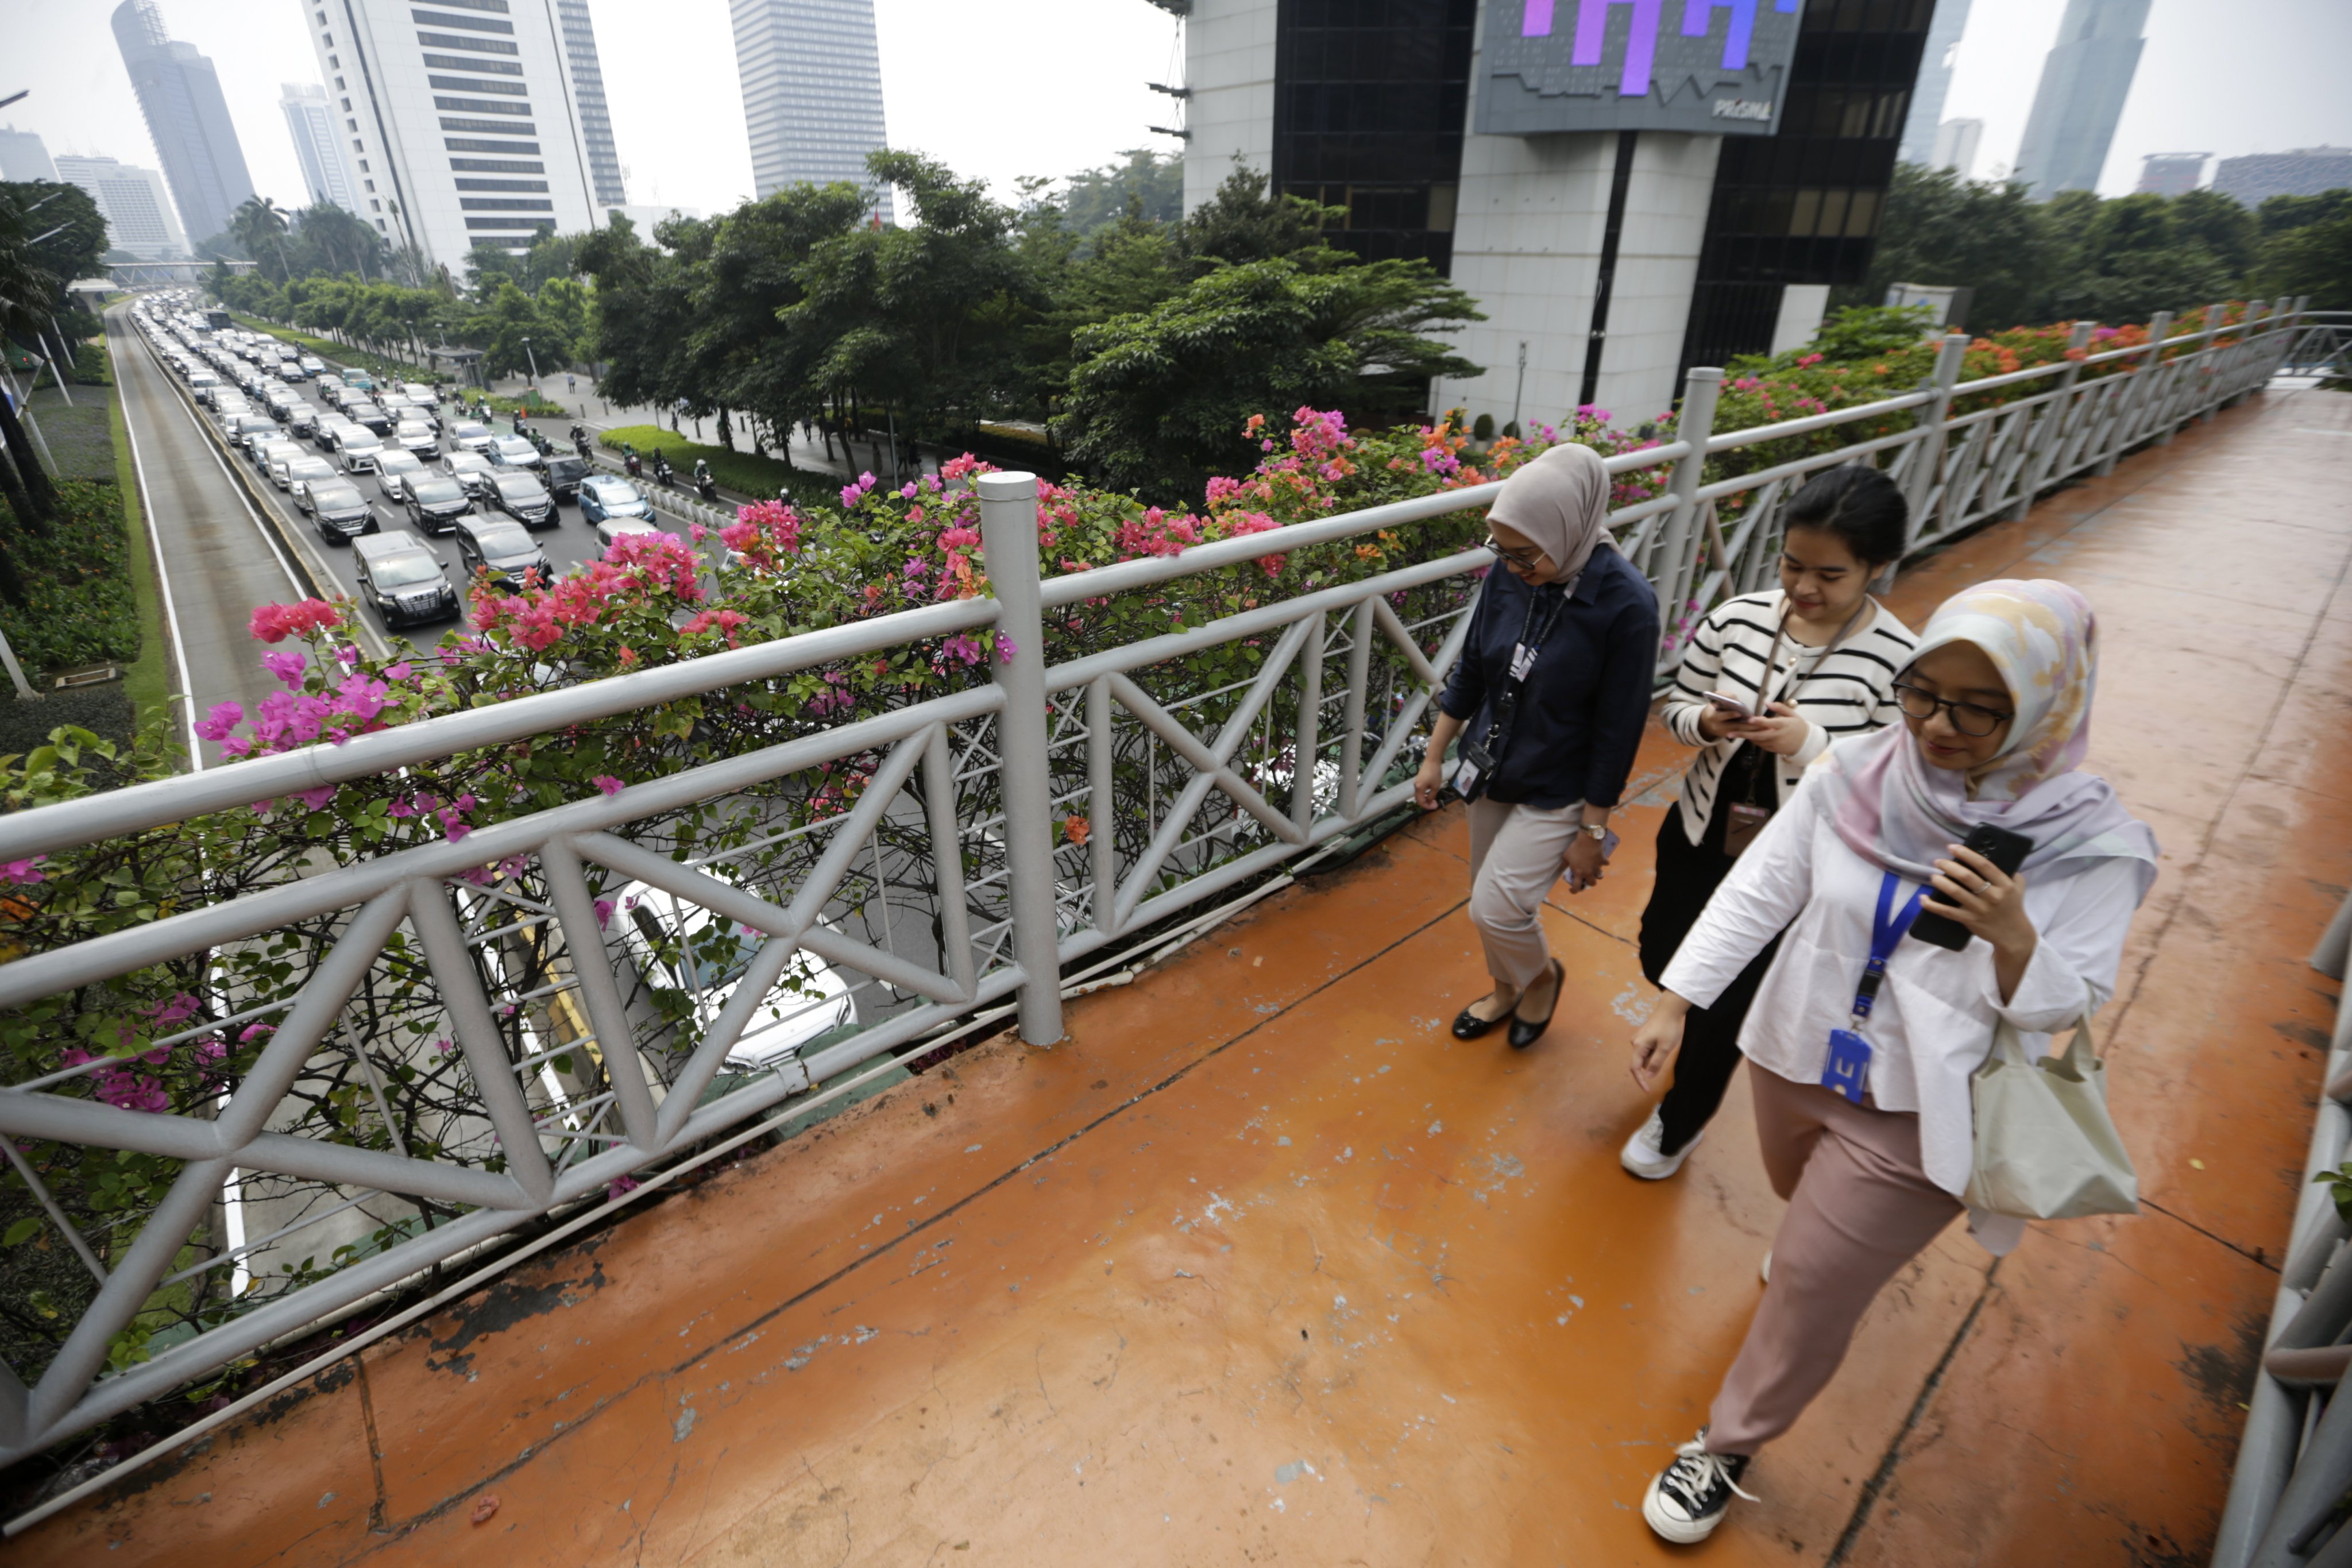 Indonesians walk on a pedestrian bridge in Jakarta on May 22. Workers are expected to contribute 3 per cent of their monthly income into a new savings fund starting next month. Photo: EPA-EFE